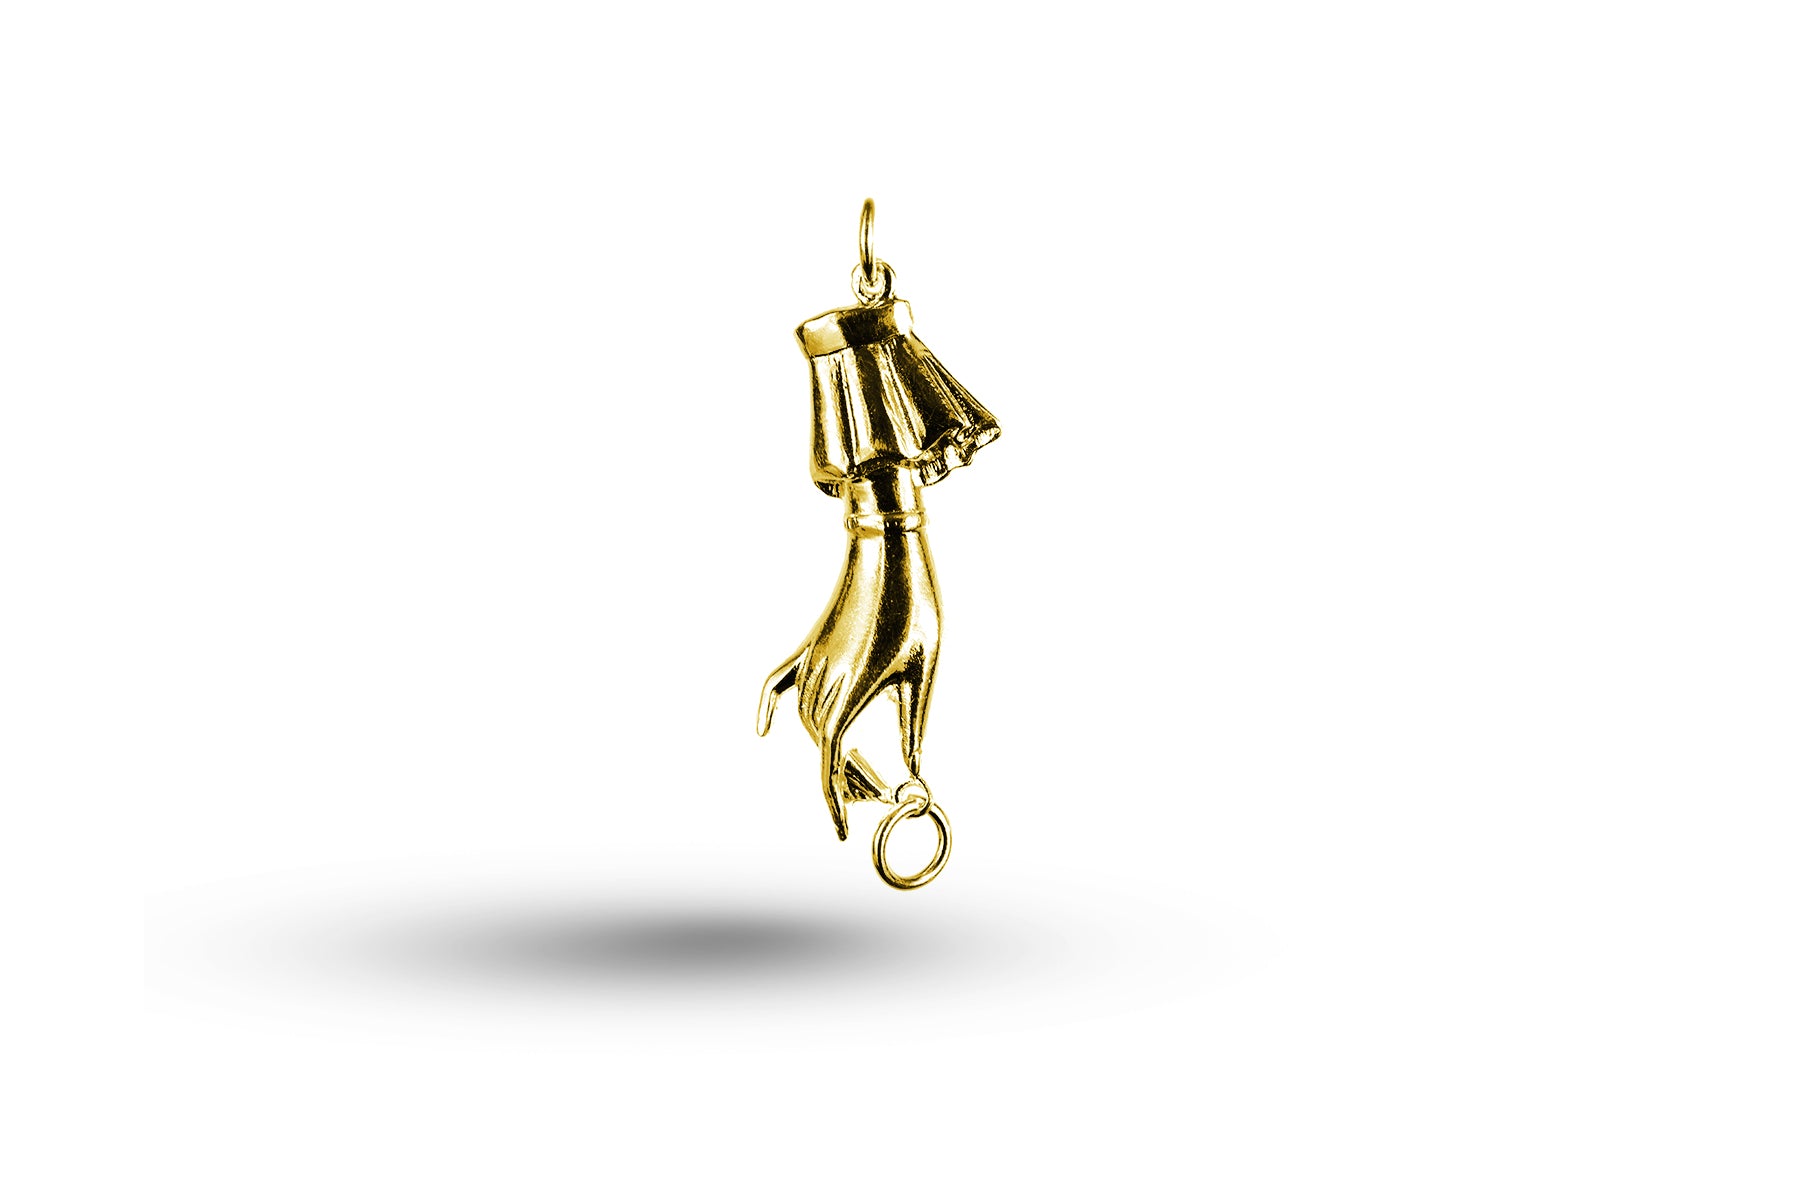 Luxury yellow gold Art Nouveau hand holding ring charm.